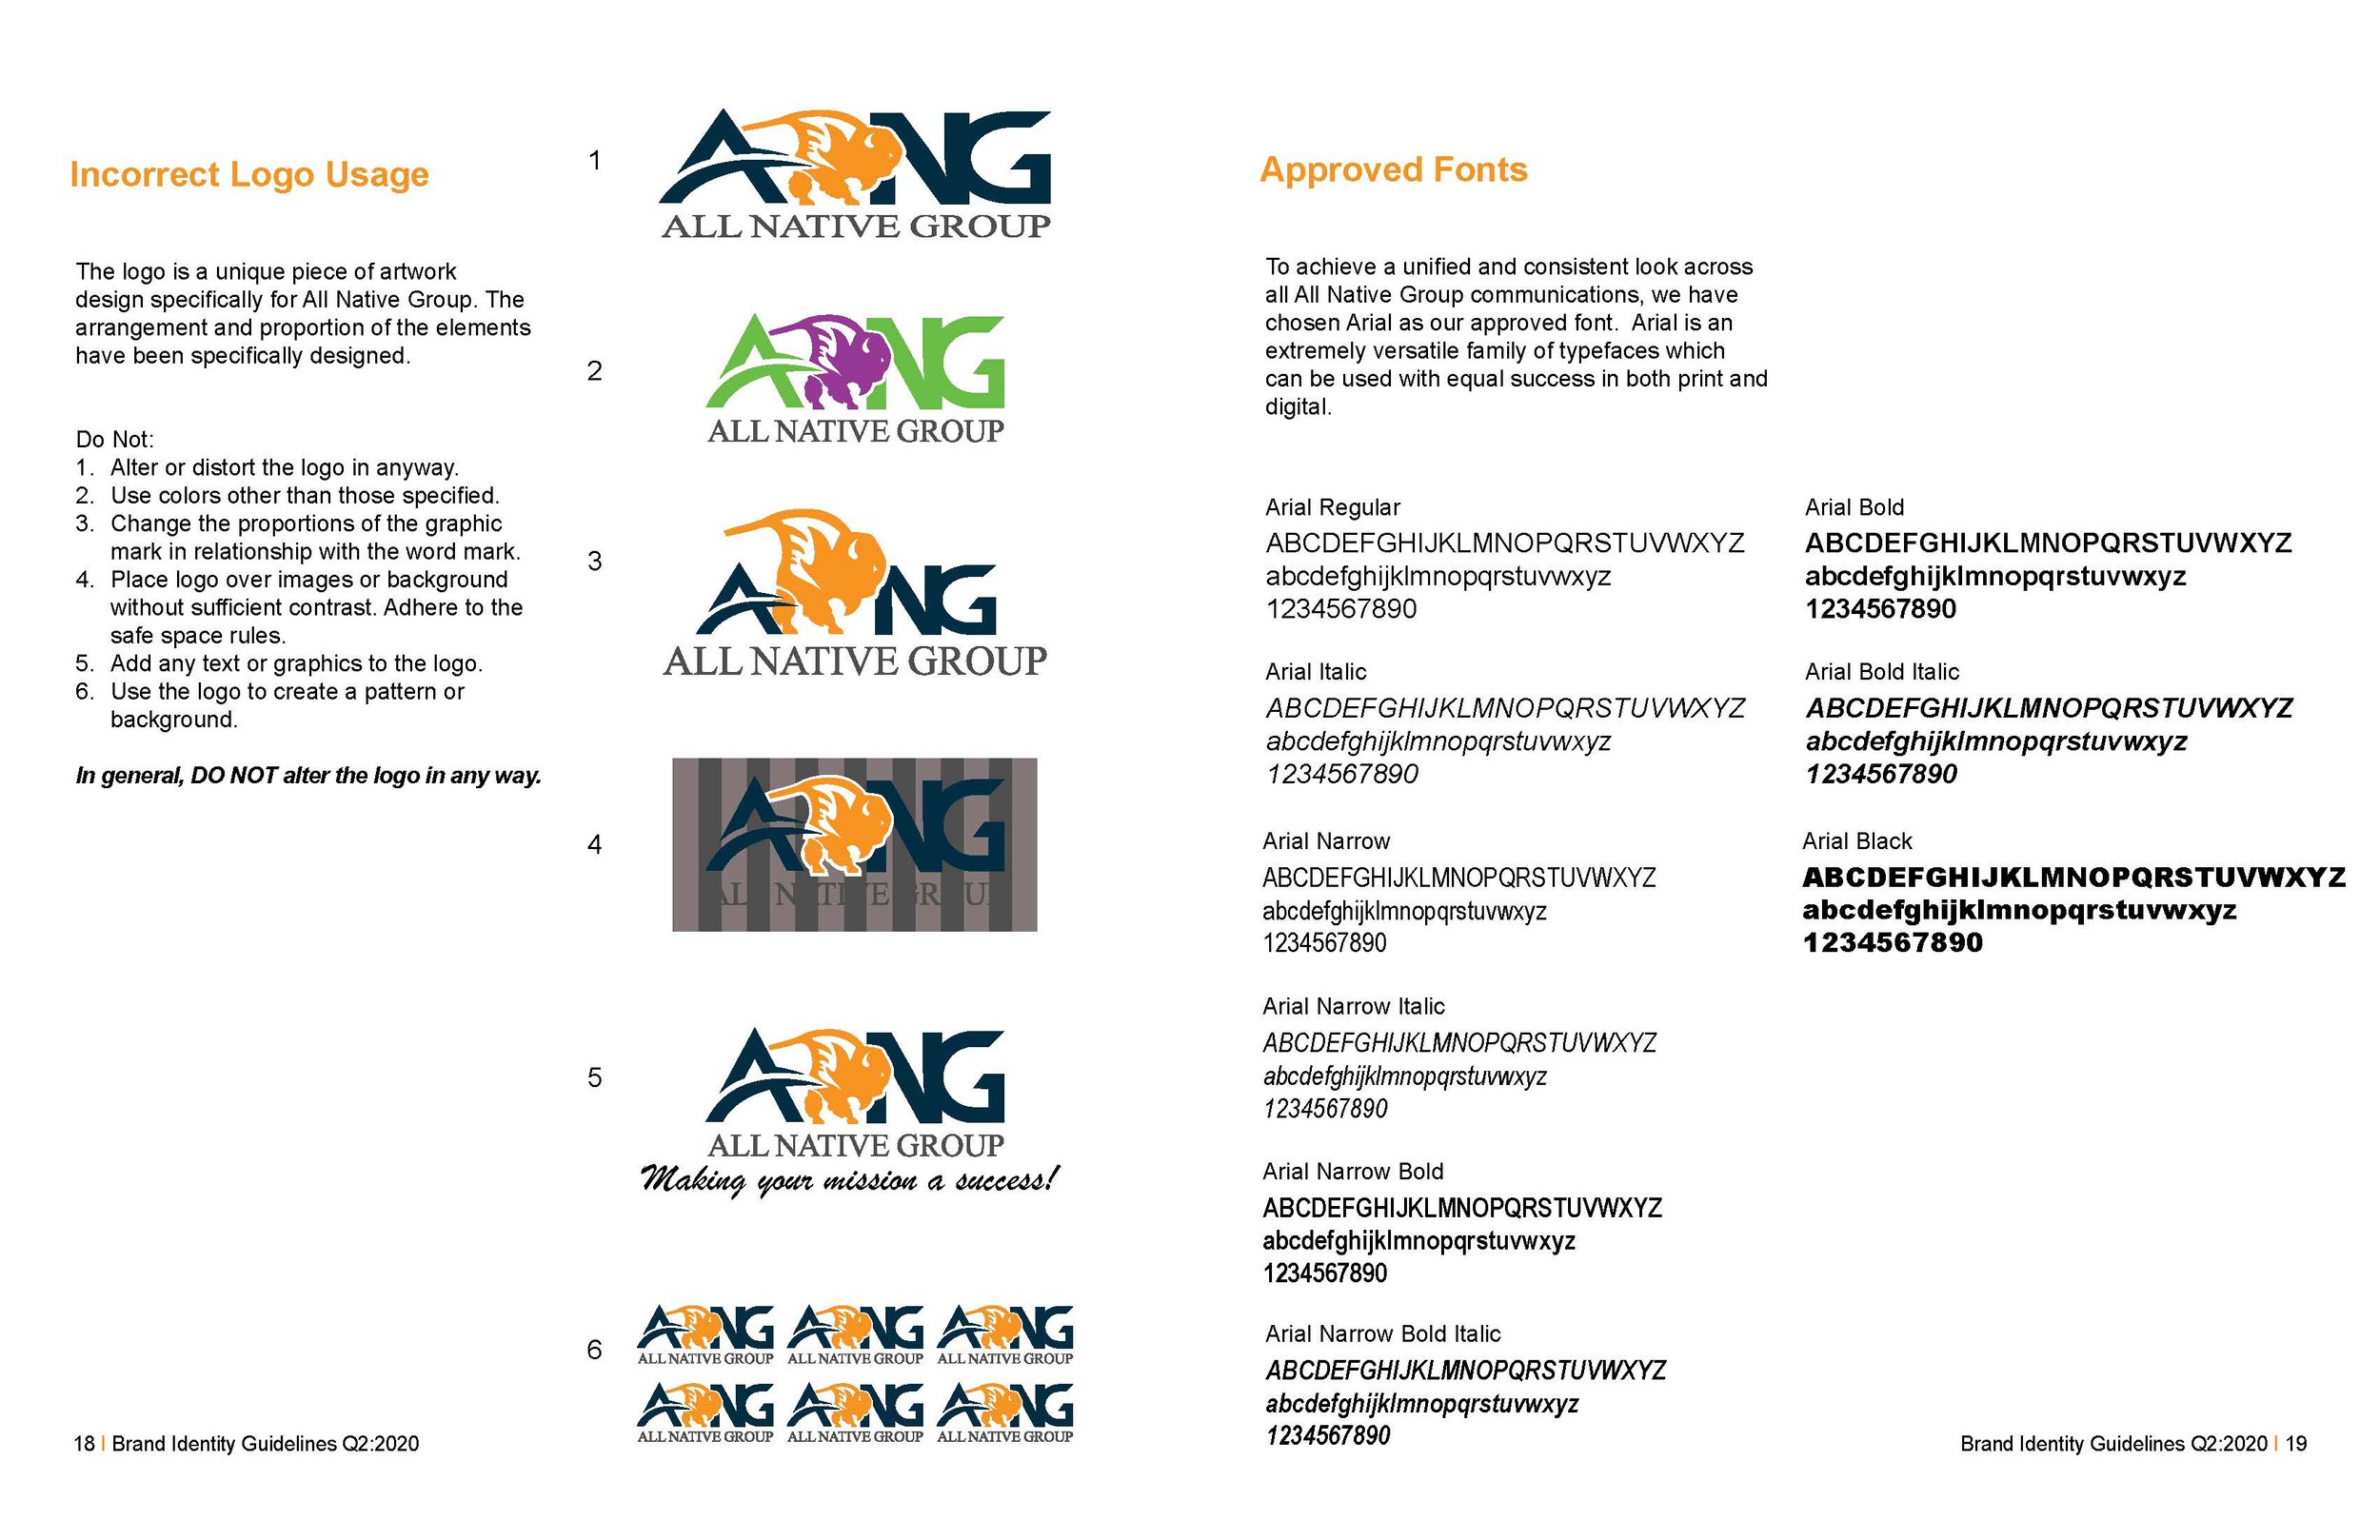 ANG Brand Identity Branding Guidelines_2pg spreads_Page_10.jpg